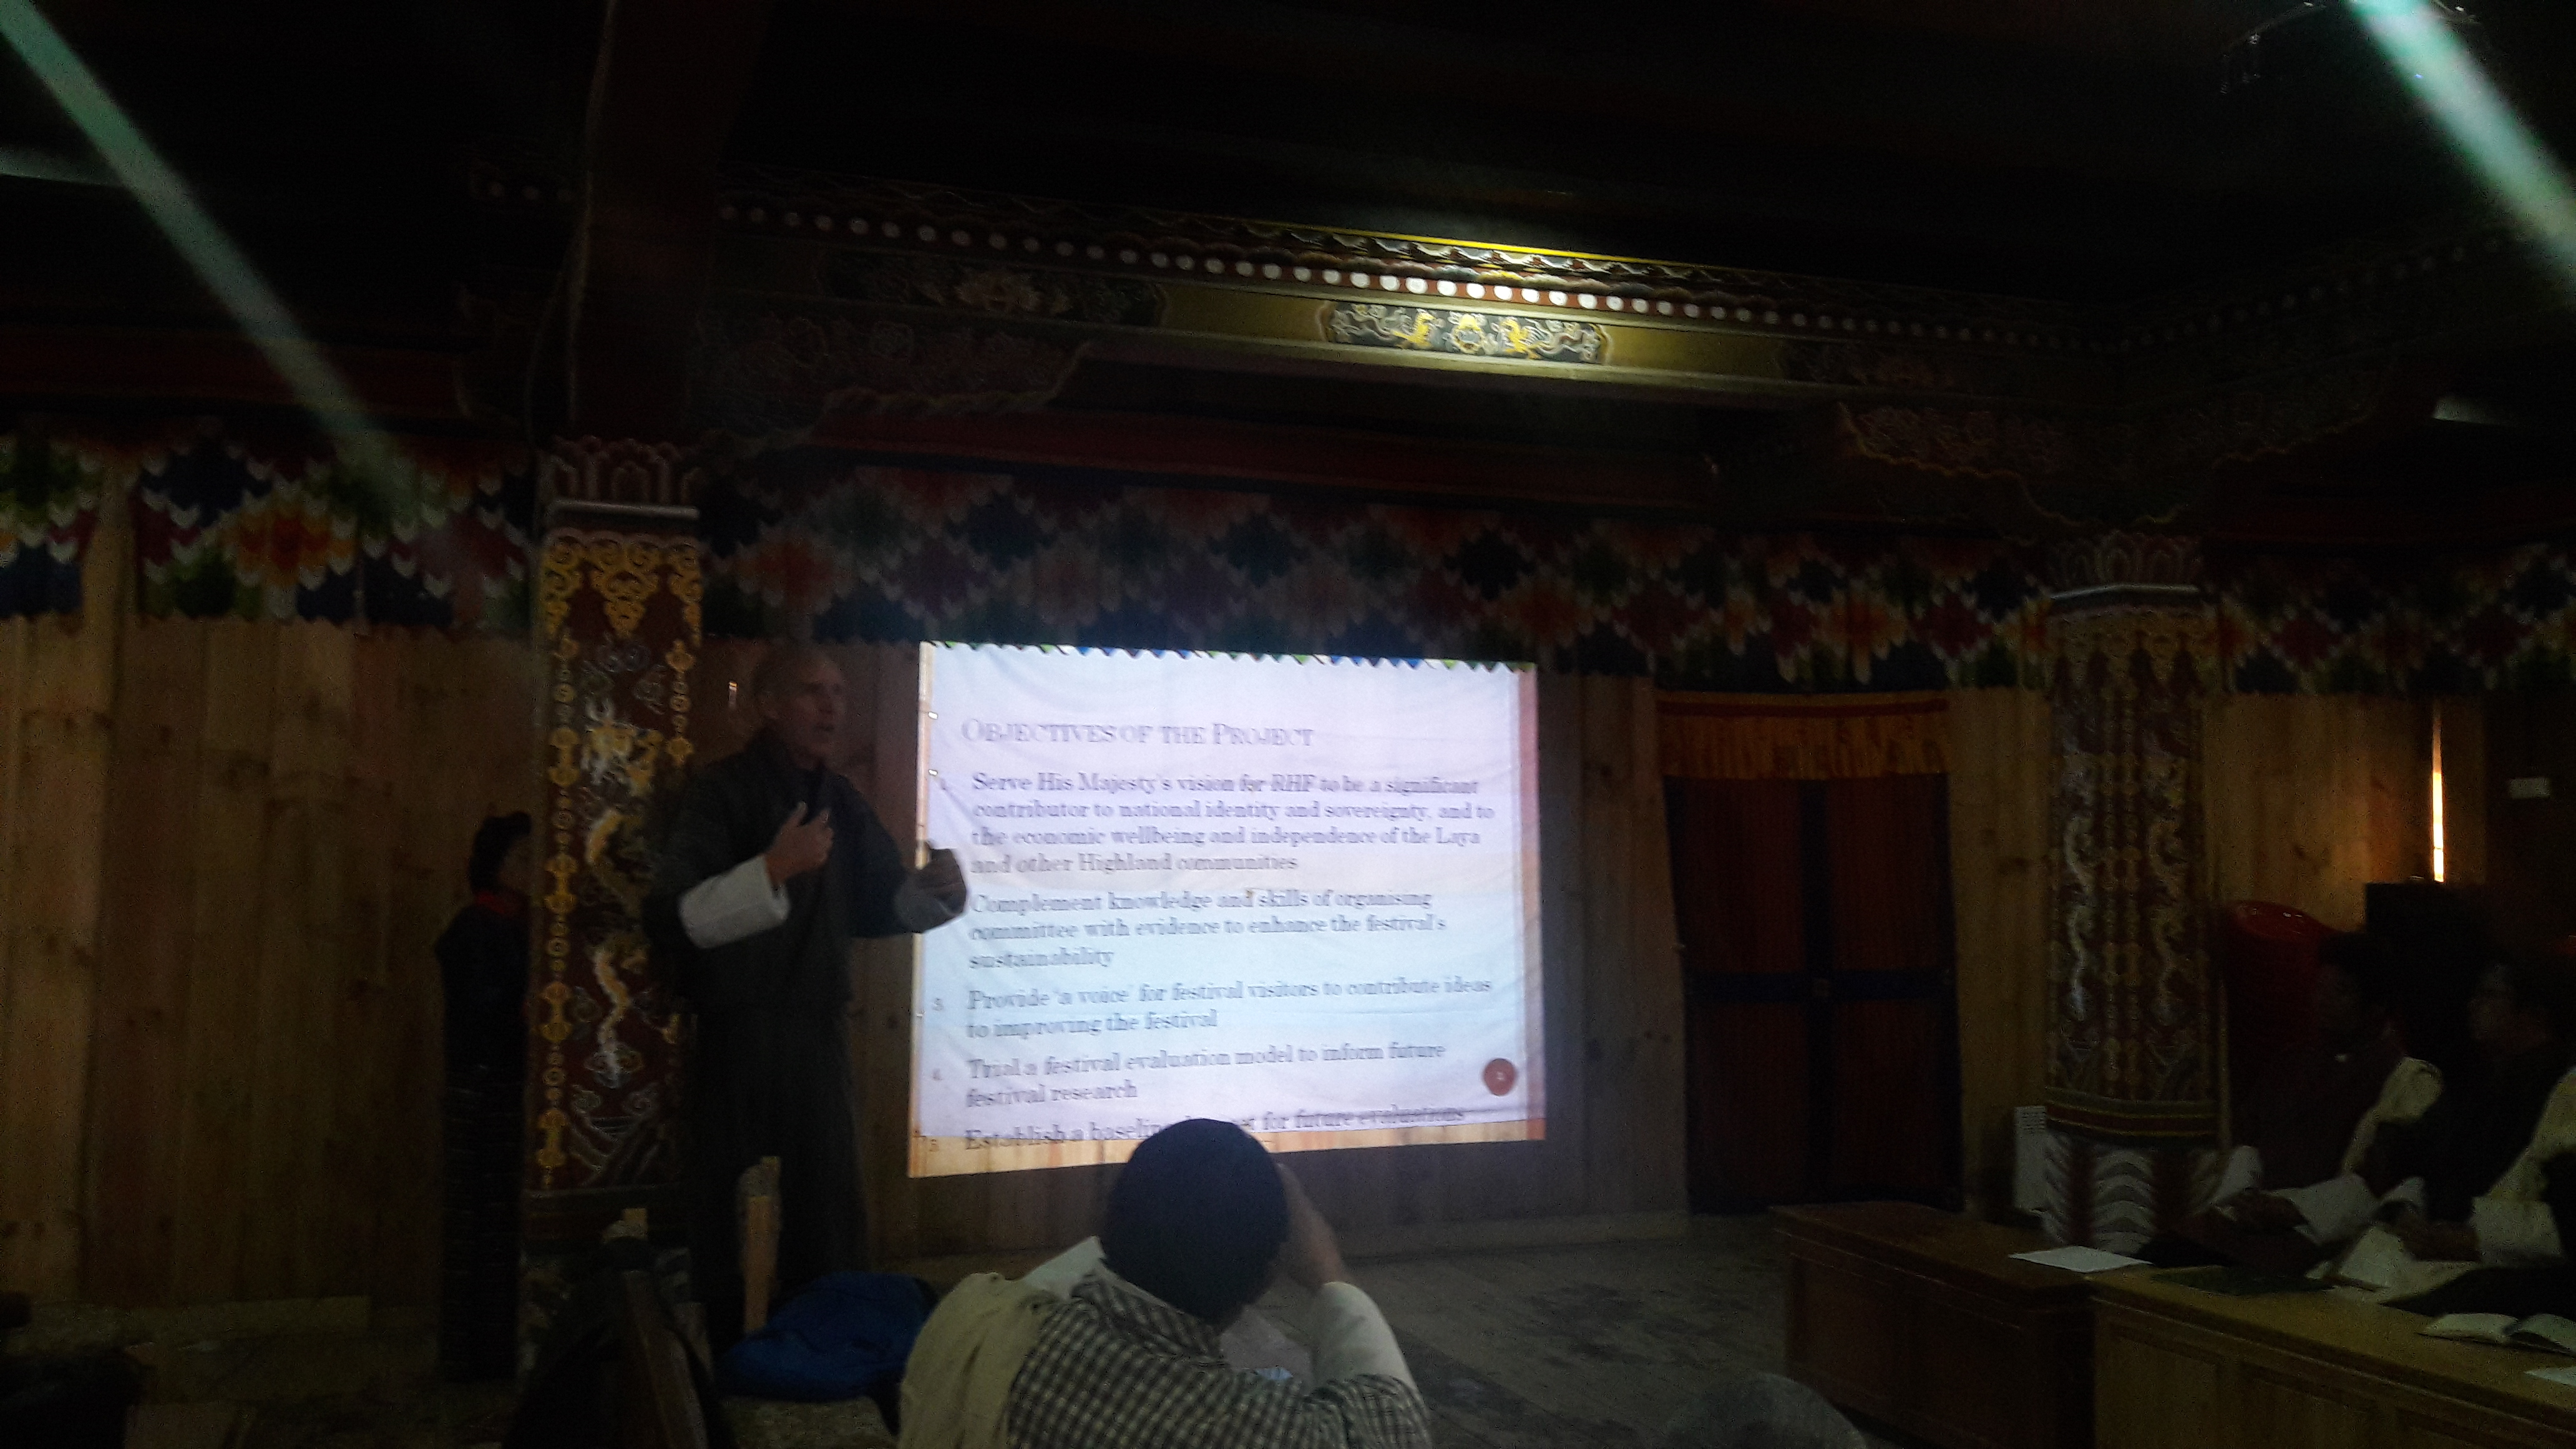 their findings on visitor experience study of Royal Highland Festival 2018 to organizing committee here in the Dzongkhag.